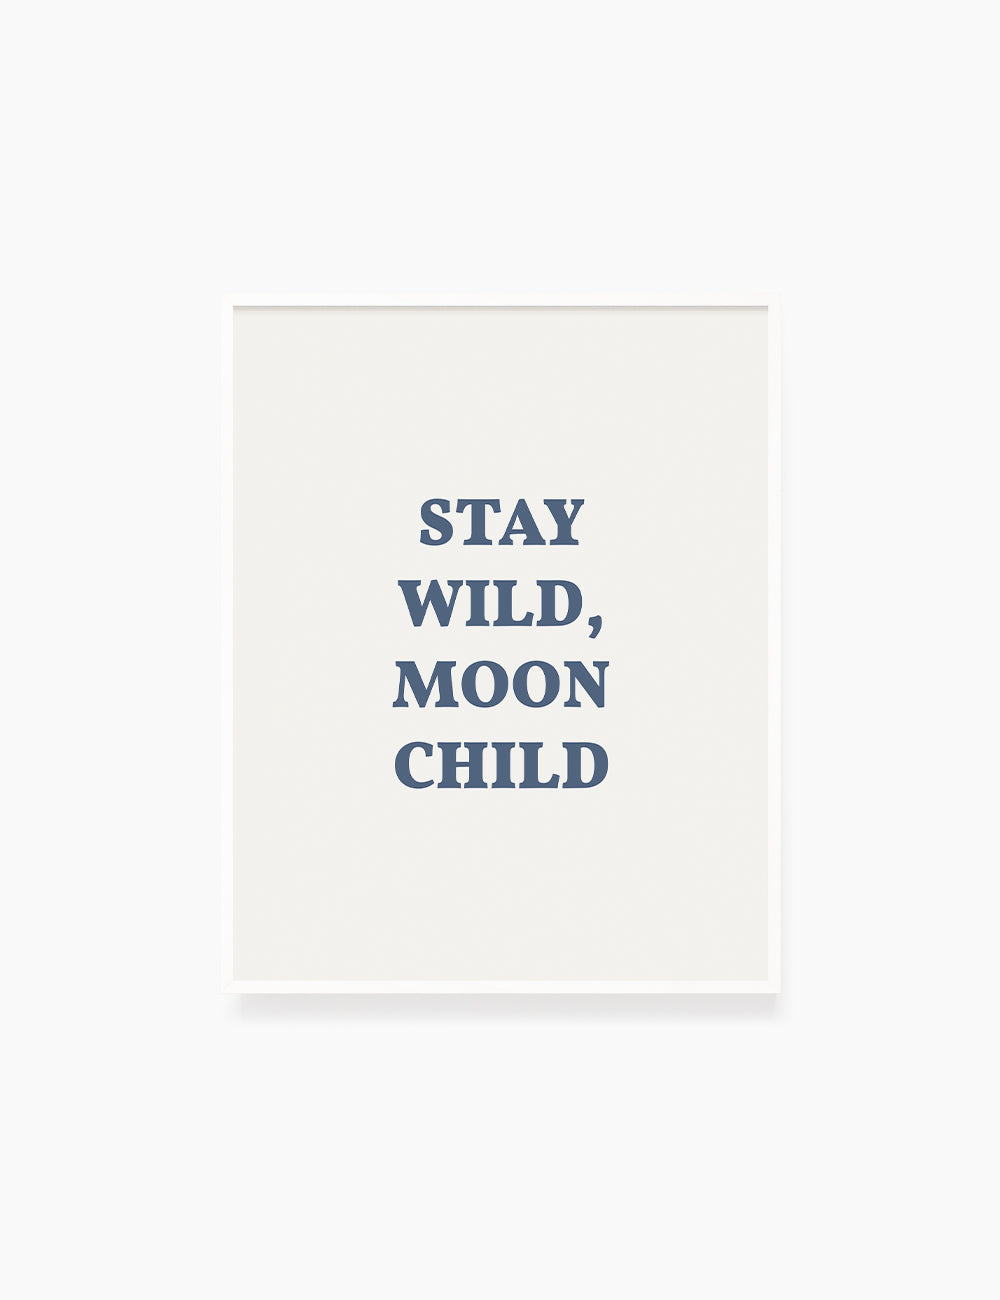 STAY WILD, MOON CHILD. Moonchild Quote. Blue. Printable Wall Art Quote. - PAPER MOON Art & Design